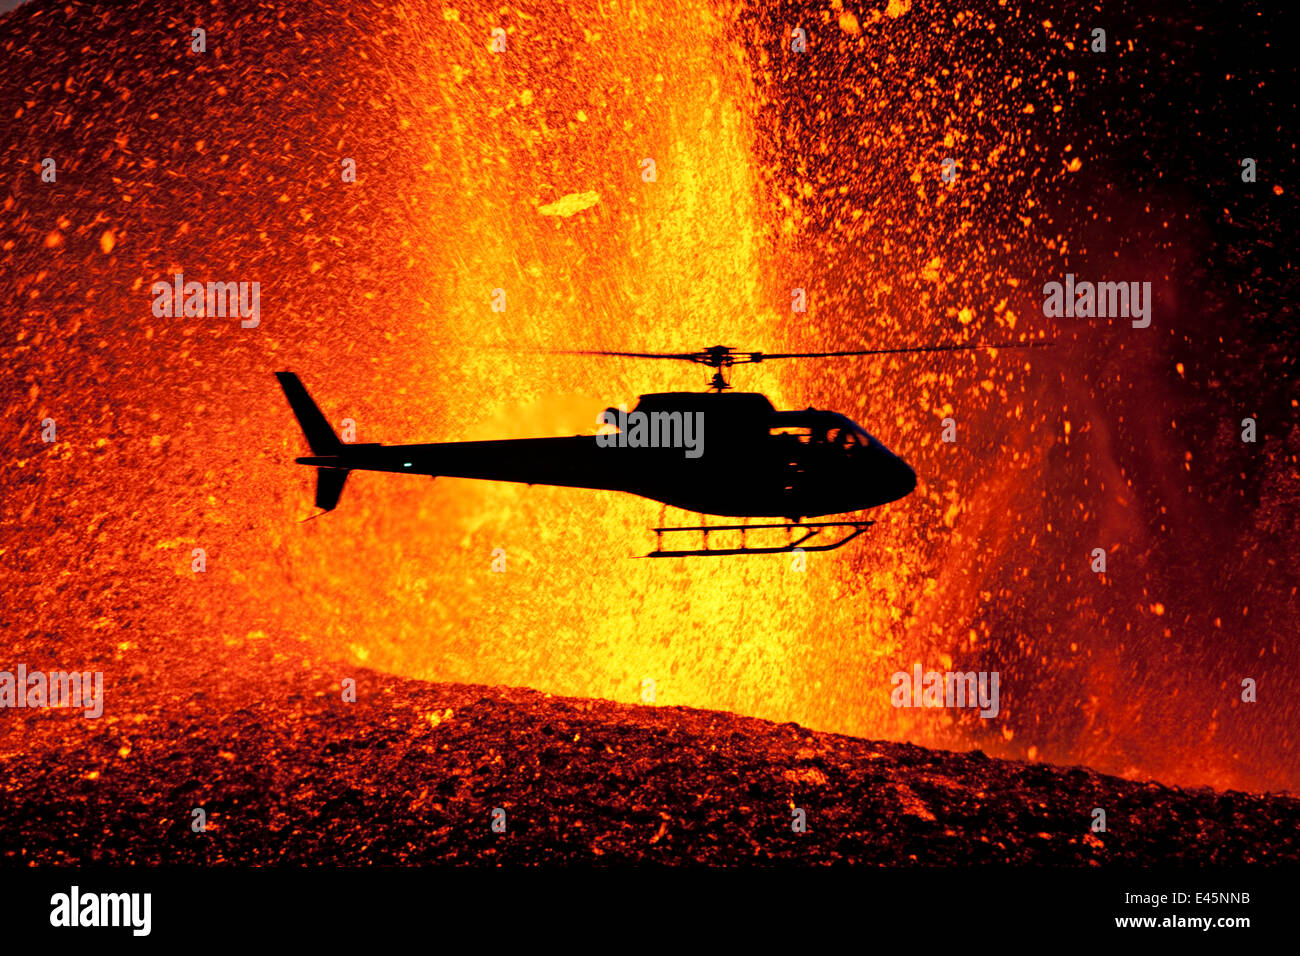 Helicopter flying over volcanic eruption near Eyjafjallajoekull glacier, Iceland, 24th March 2010. Volcano previously dormant since 1821. Stock Photo